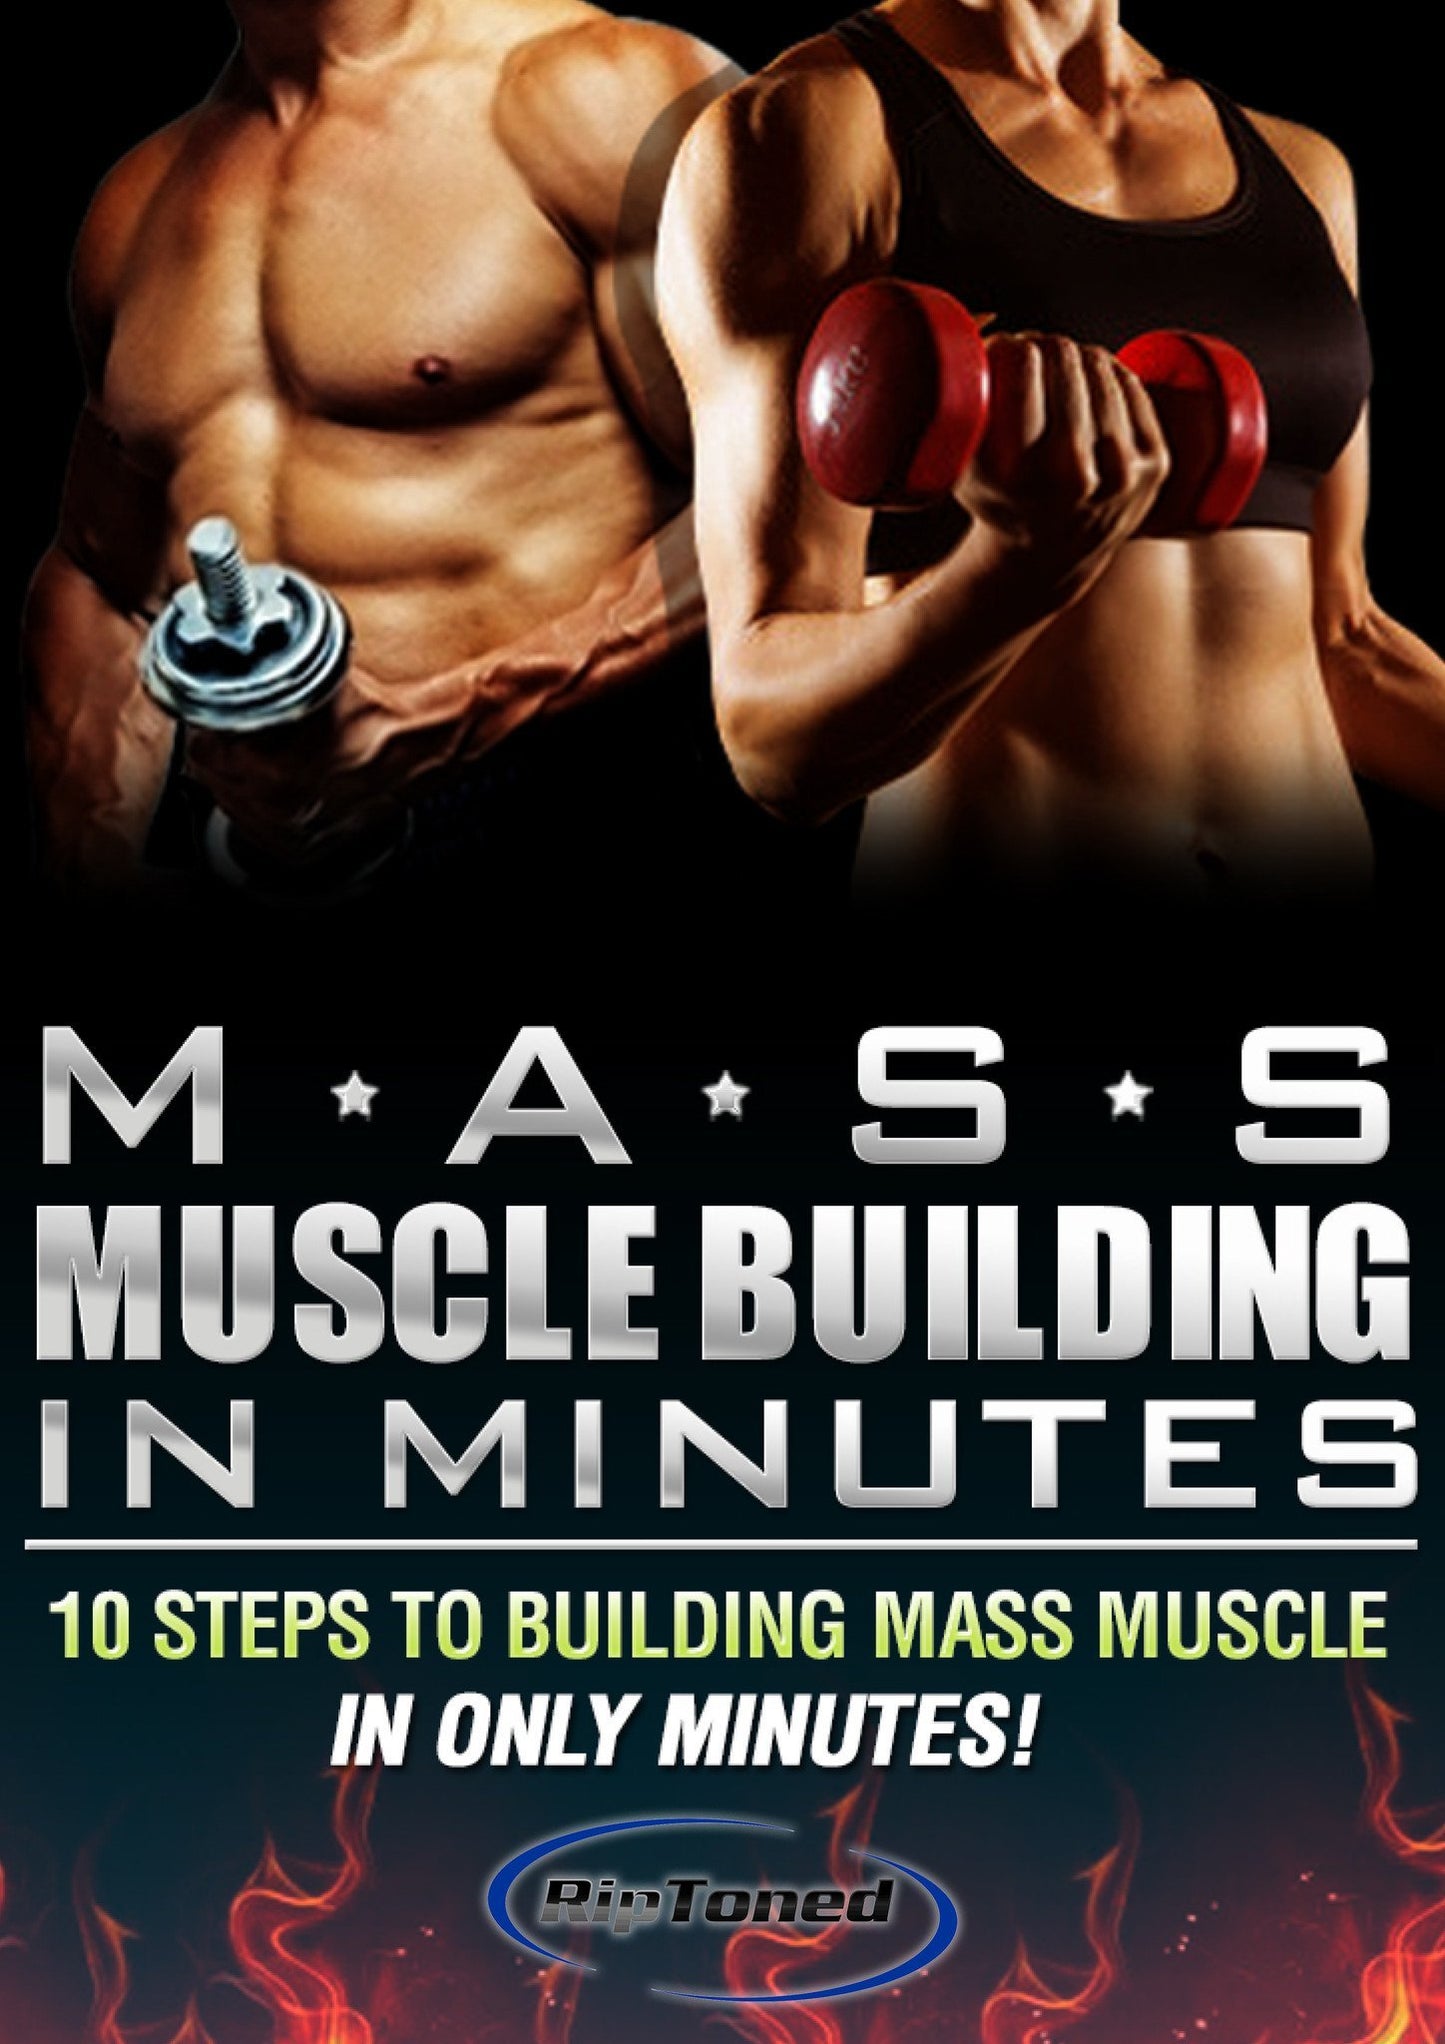 Mass Muscle Building in Minutes - Rip Toned